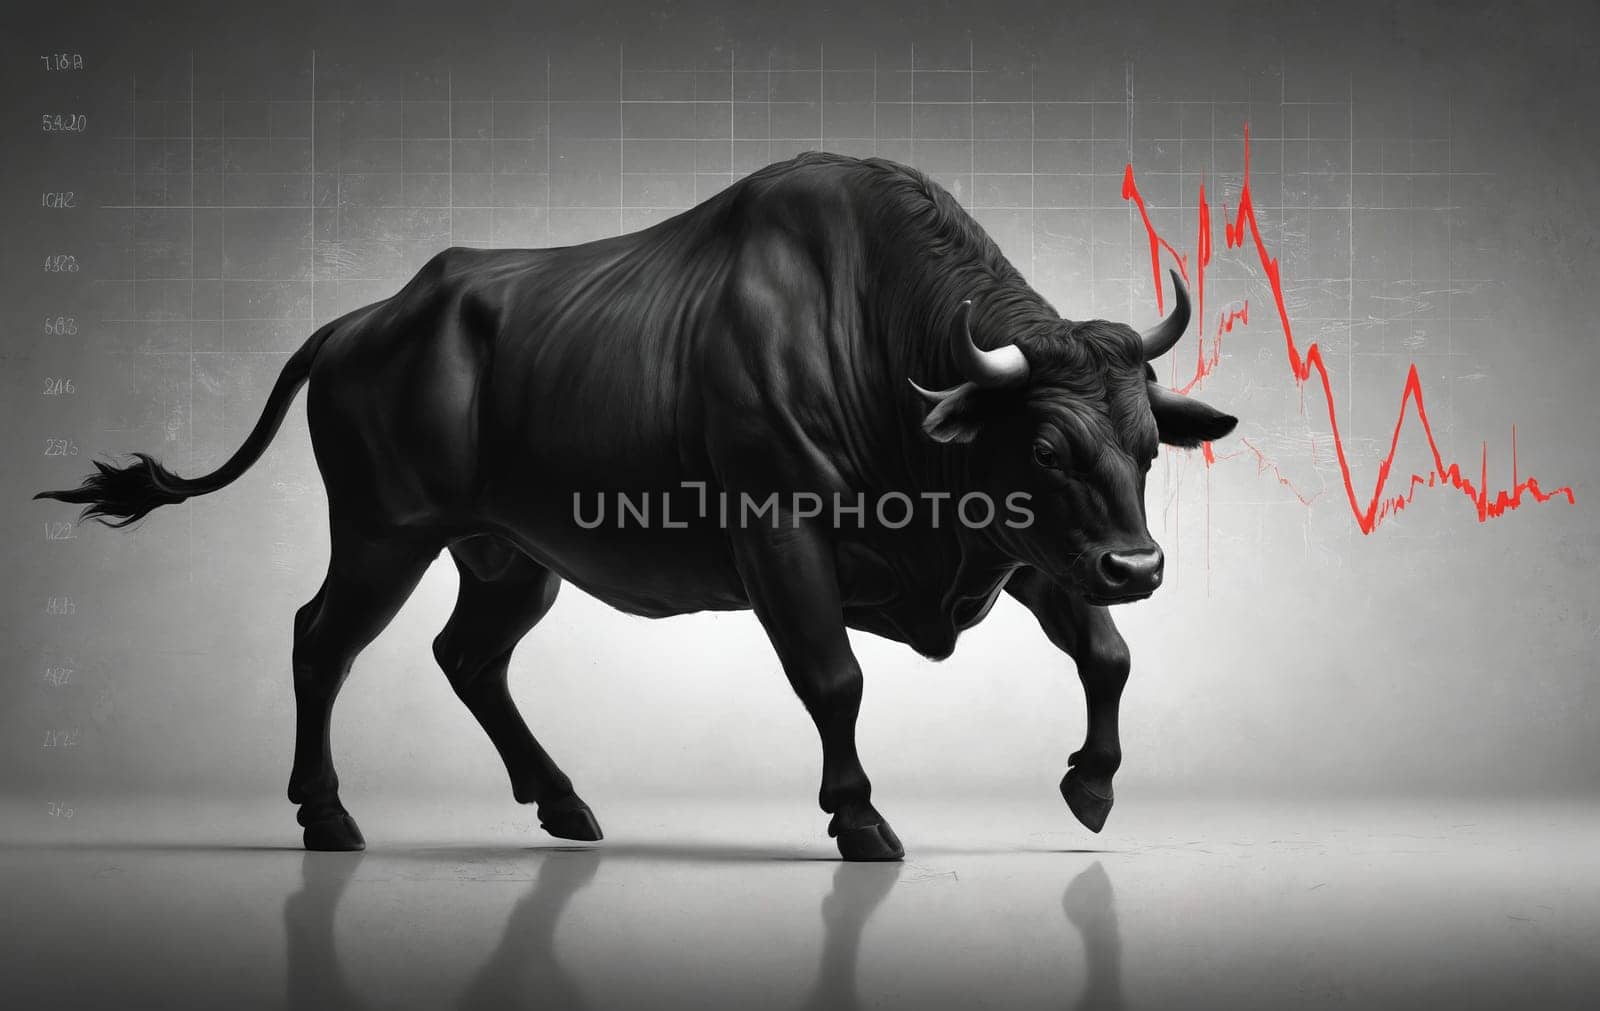 A bull carrying a graph on its back. The horns on its head and the strength in its body symbolize power and stability in nature